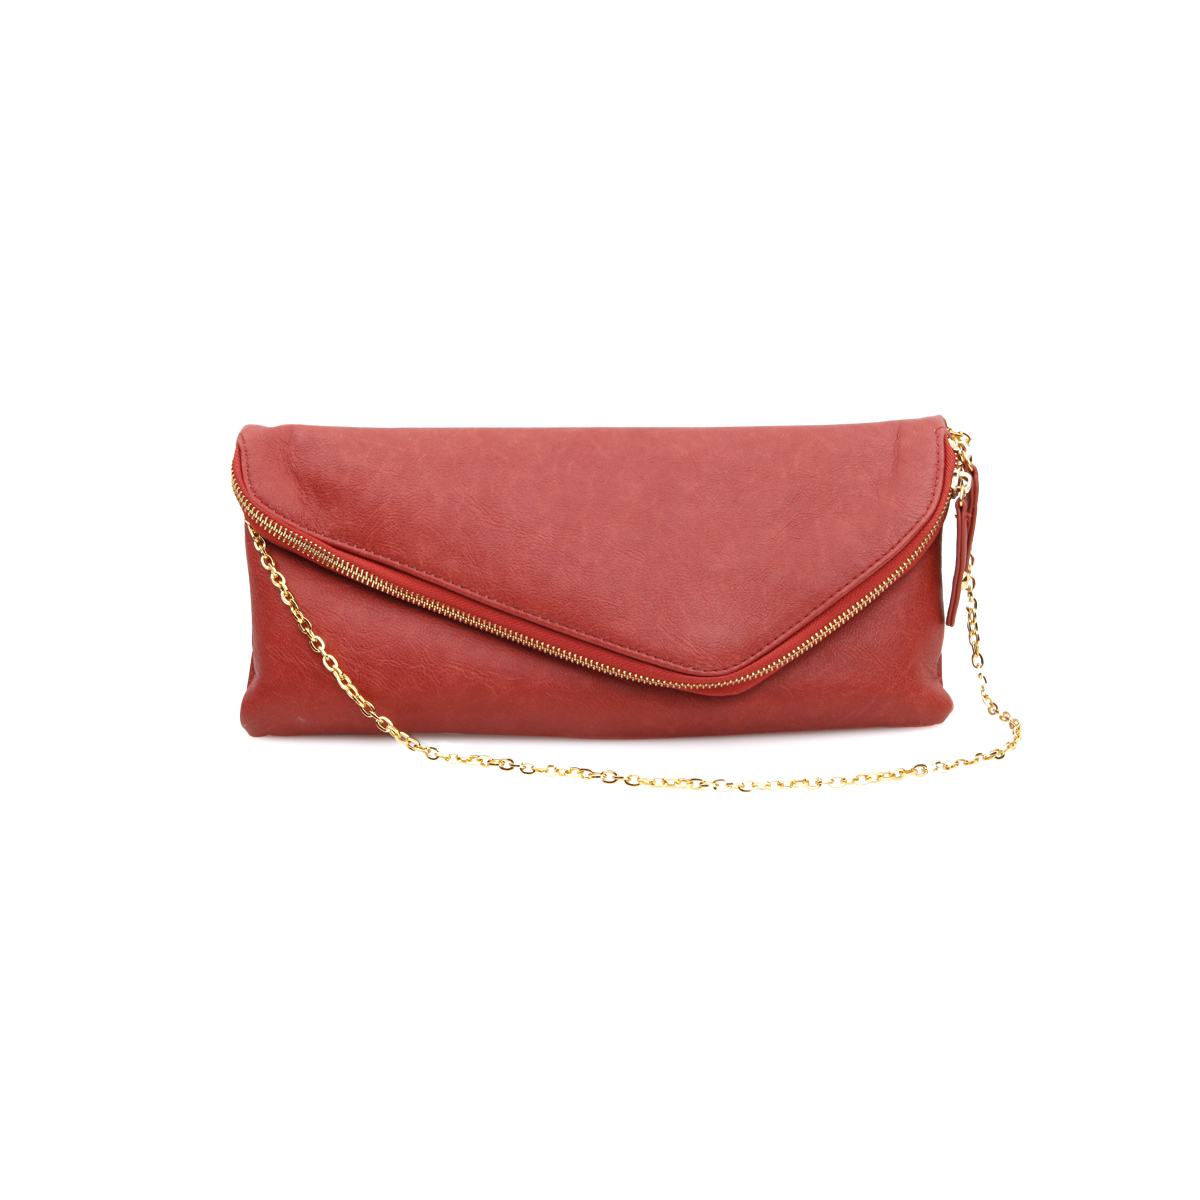 Foldover Zip Envelope Clutch by Urban Expressions